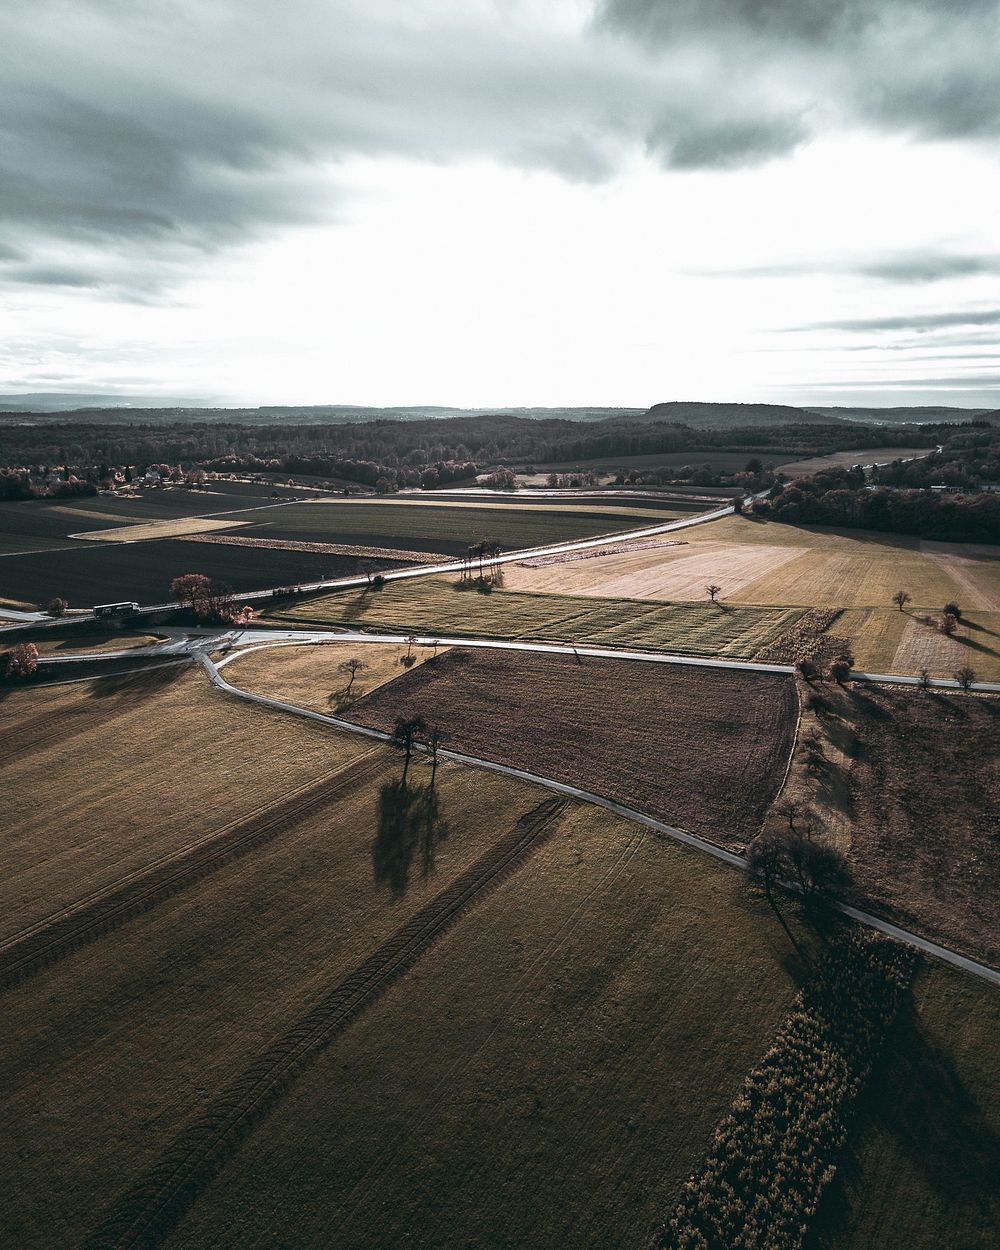 Aerial view of fields in Maulbronn, Germany